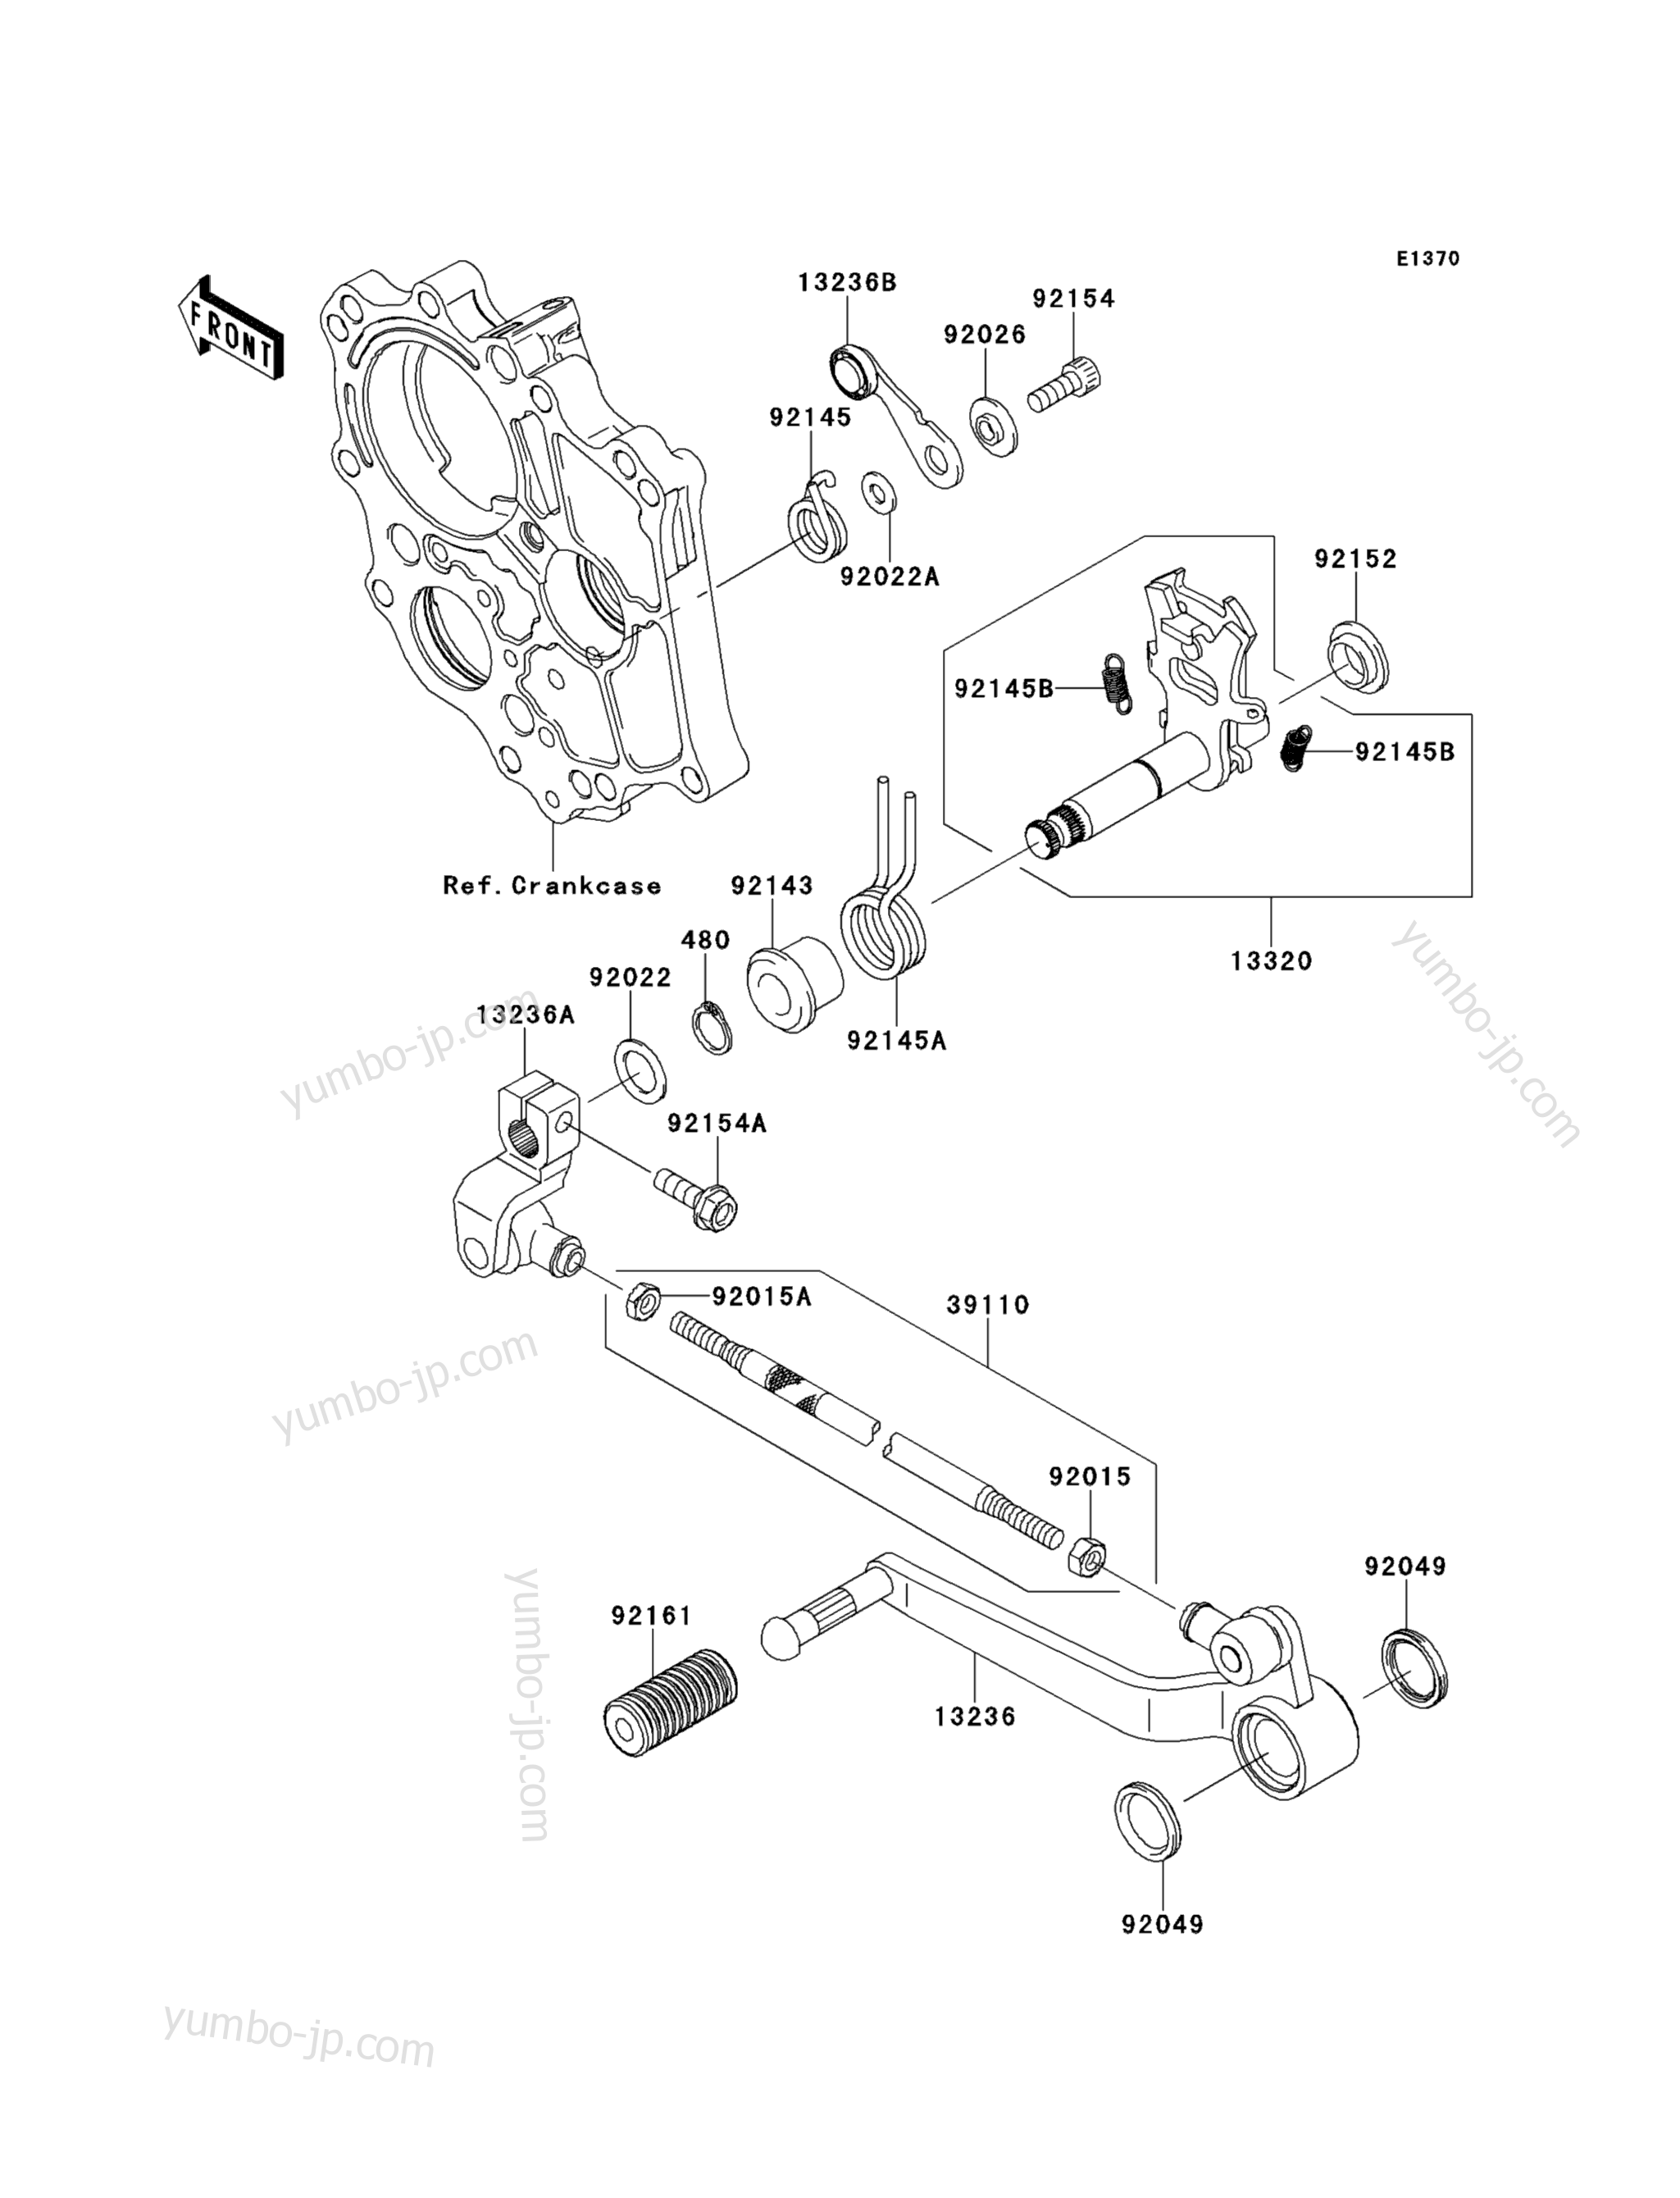 GEAR CHANGE MECHANISM for motorcycles KAWASAKI VERSYS (KLE650CDF) 2013 year